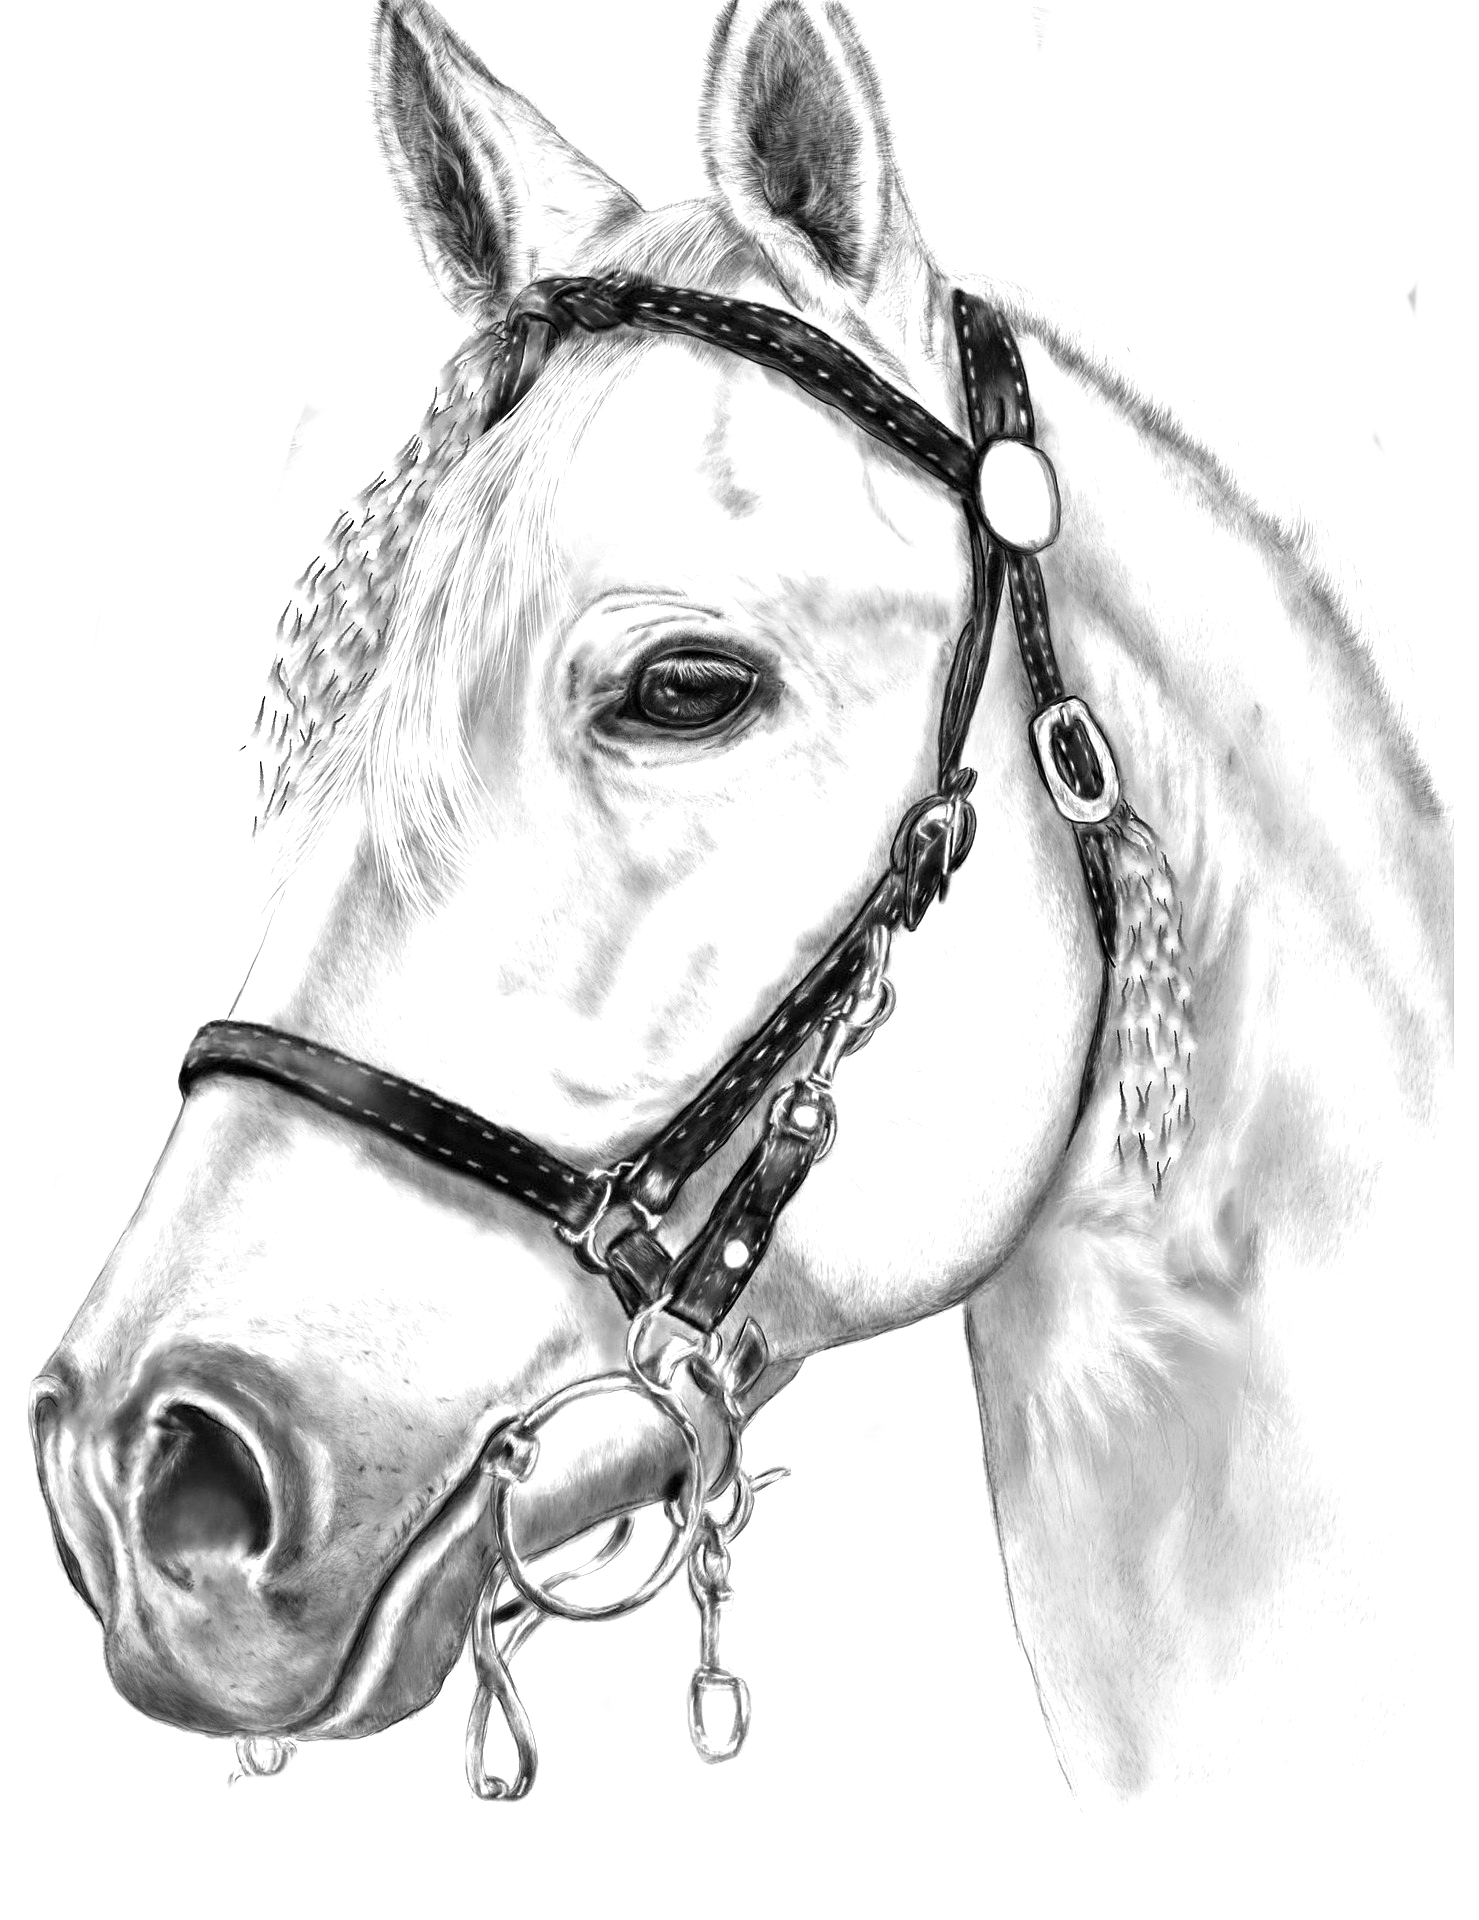 Coloring page of horse head with bridle